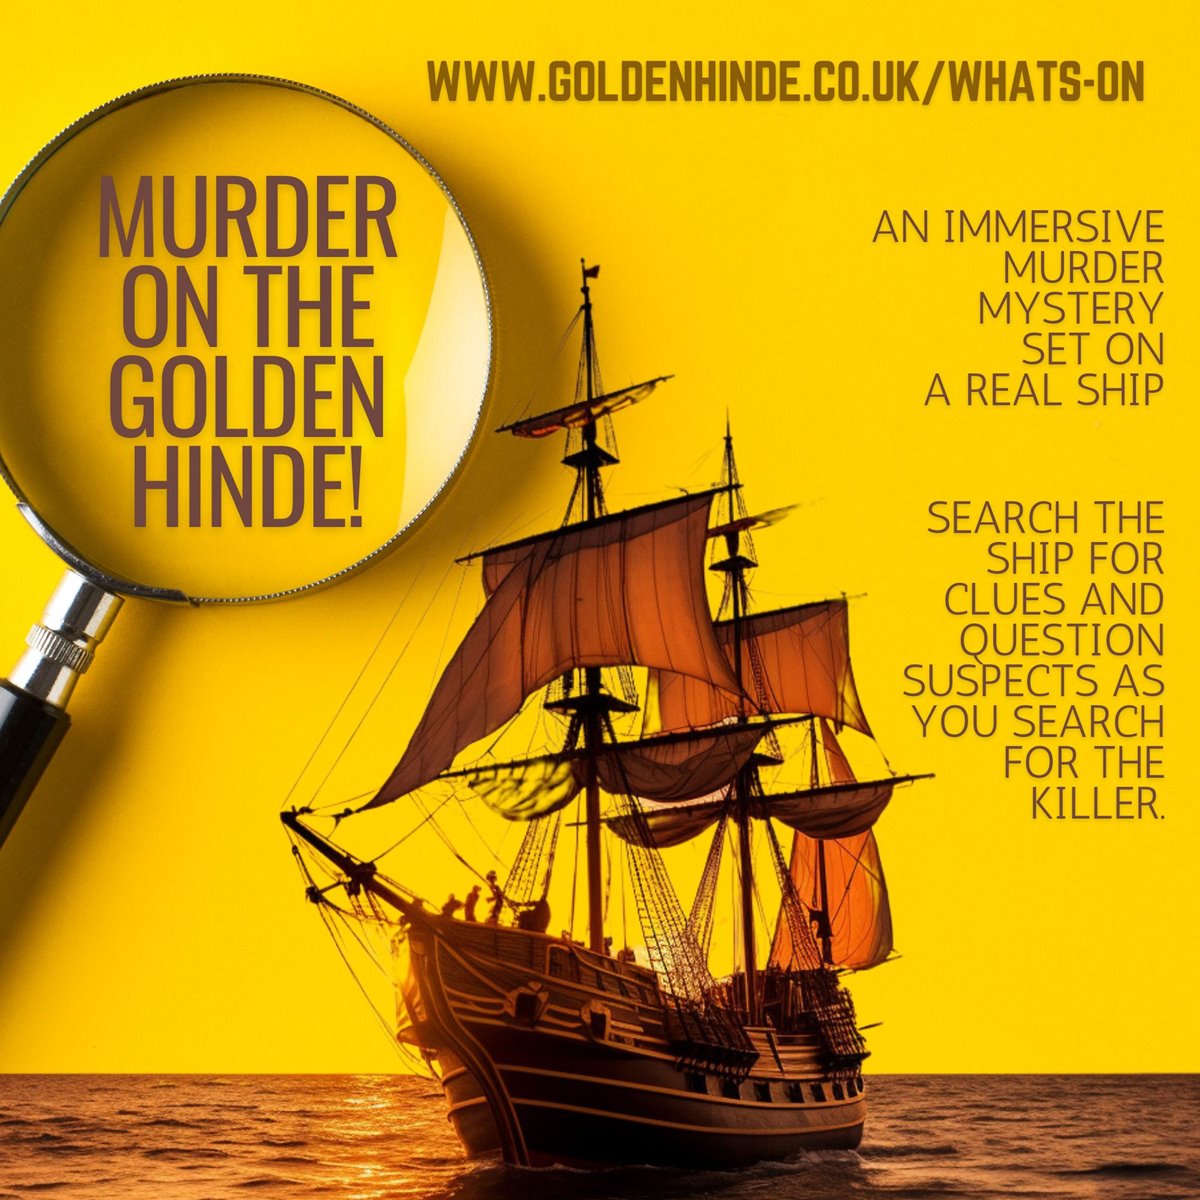 article thumb - Image of The Golden Hinde ship and a magnifying glass